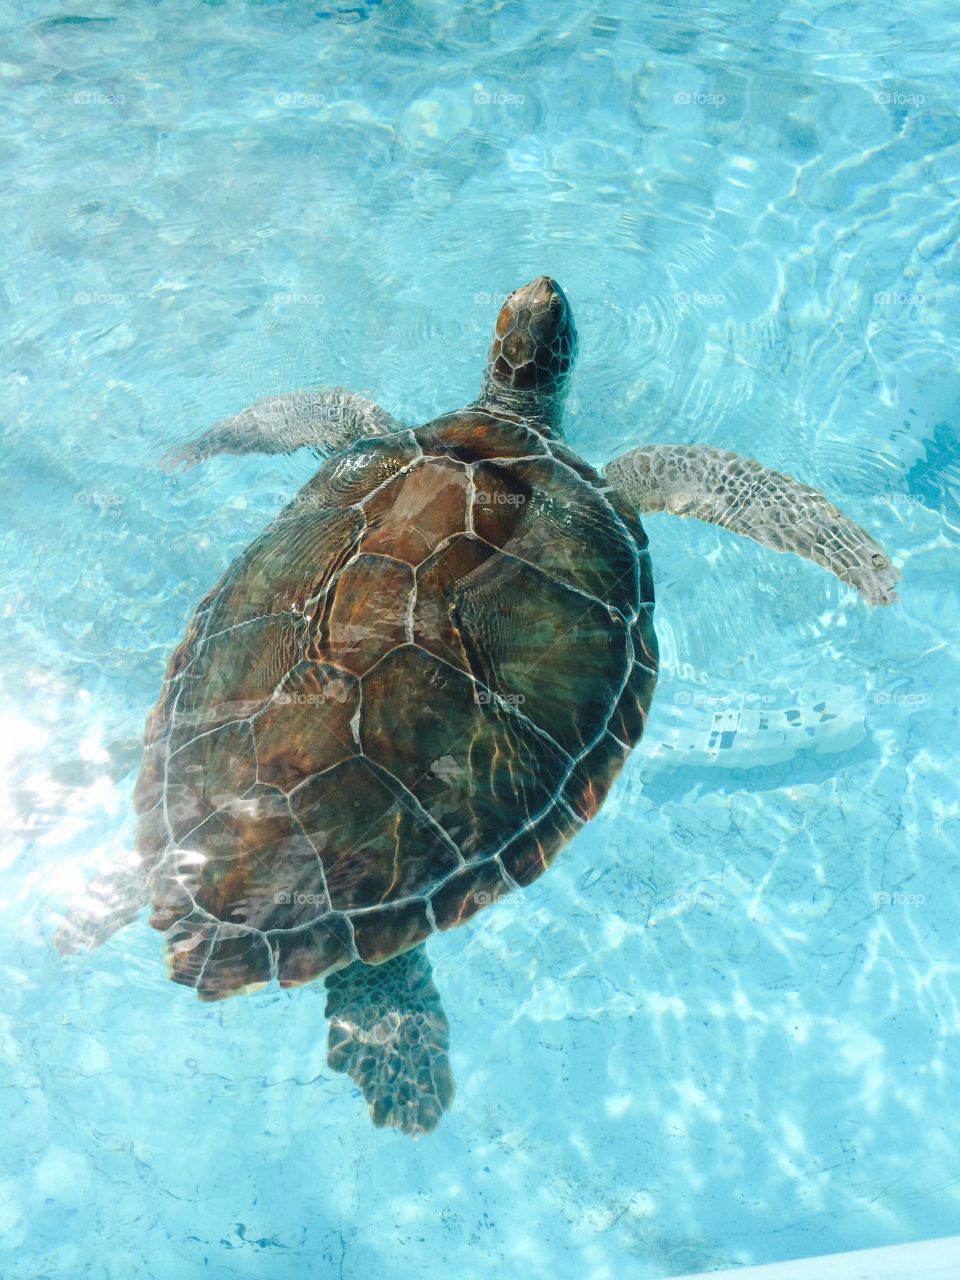 Totally awesome duuuude. Taken at Turtle Hospital in The Florida Keys